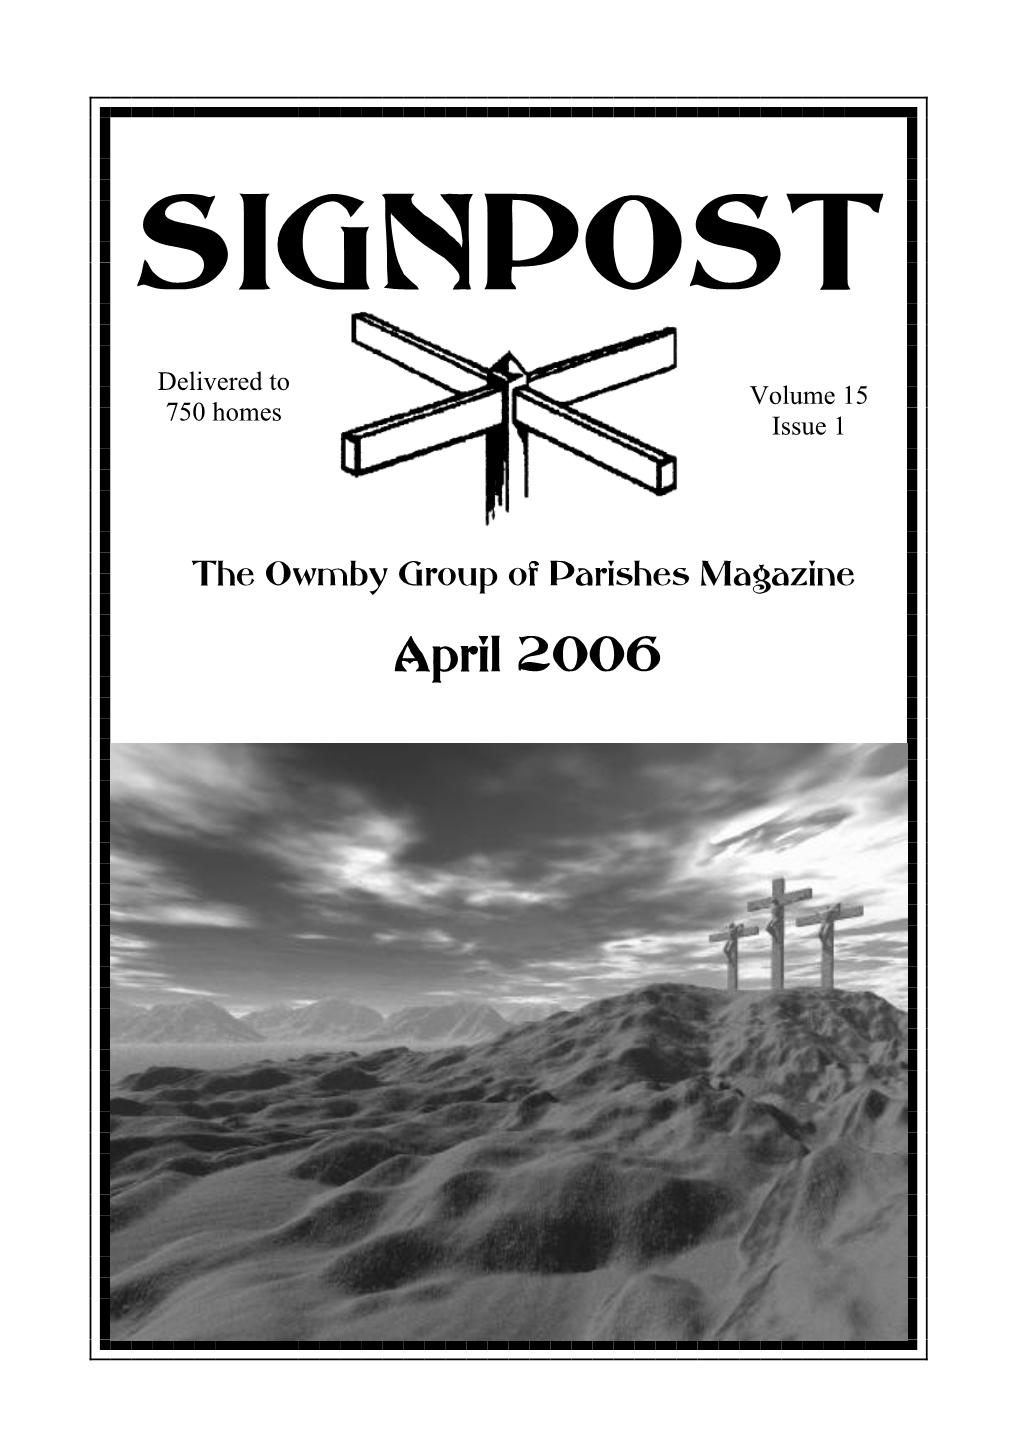 The Owmby Group of Parishes Magazine 2 Signpost